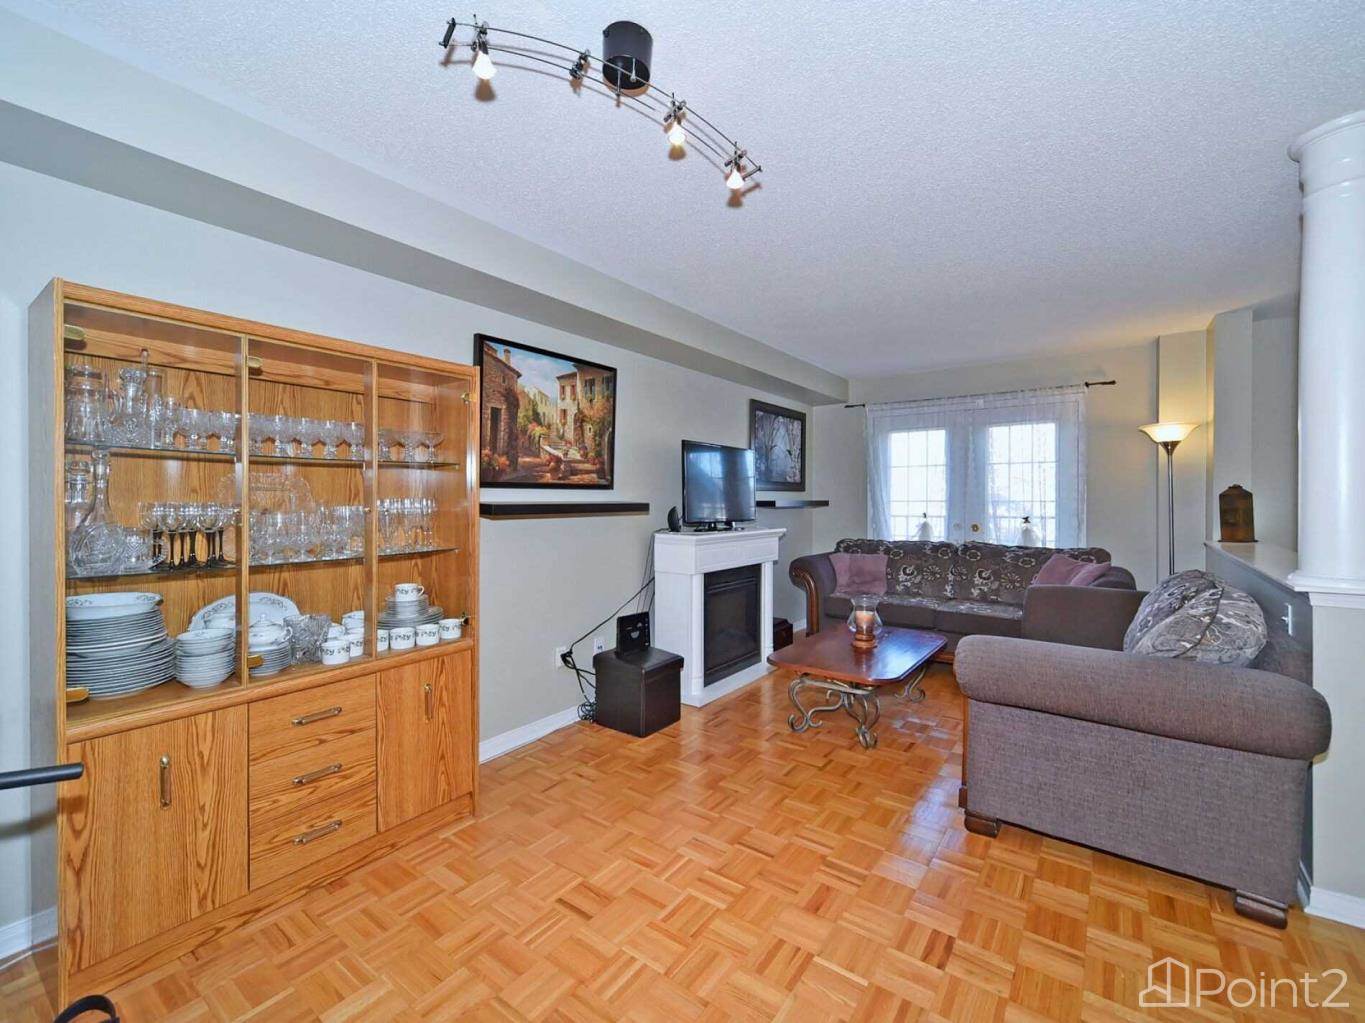 19 Foxchase Ave Vaughan Ontario L 4 L 9 N 1, Vaughan, ON L4L9N1 Photo 7